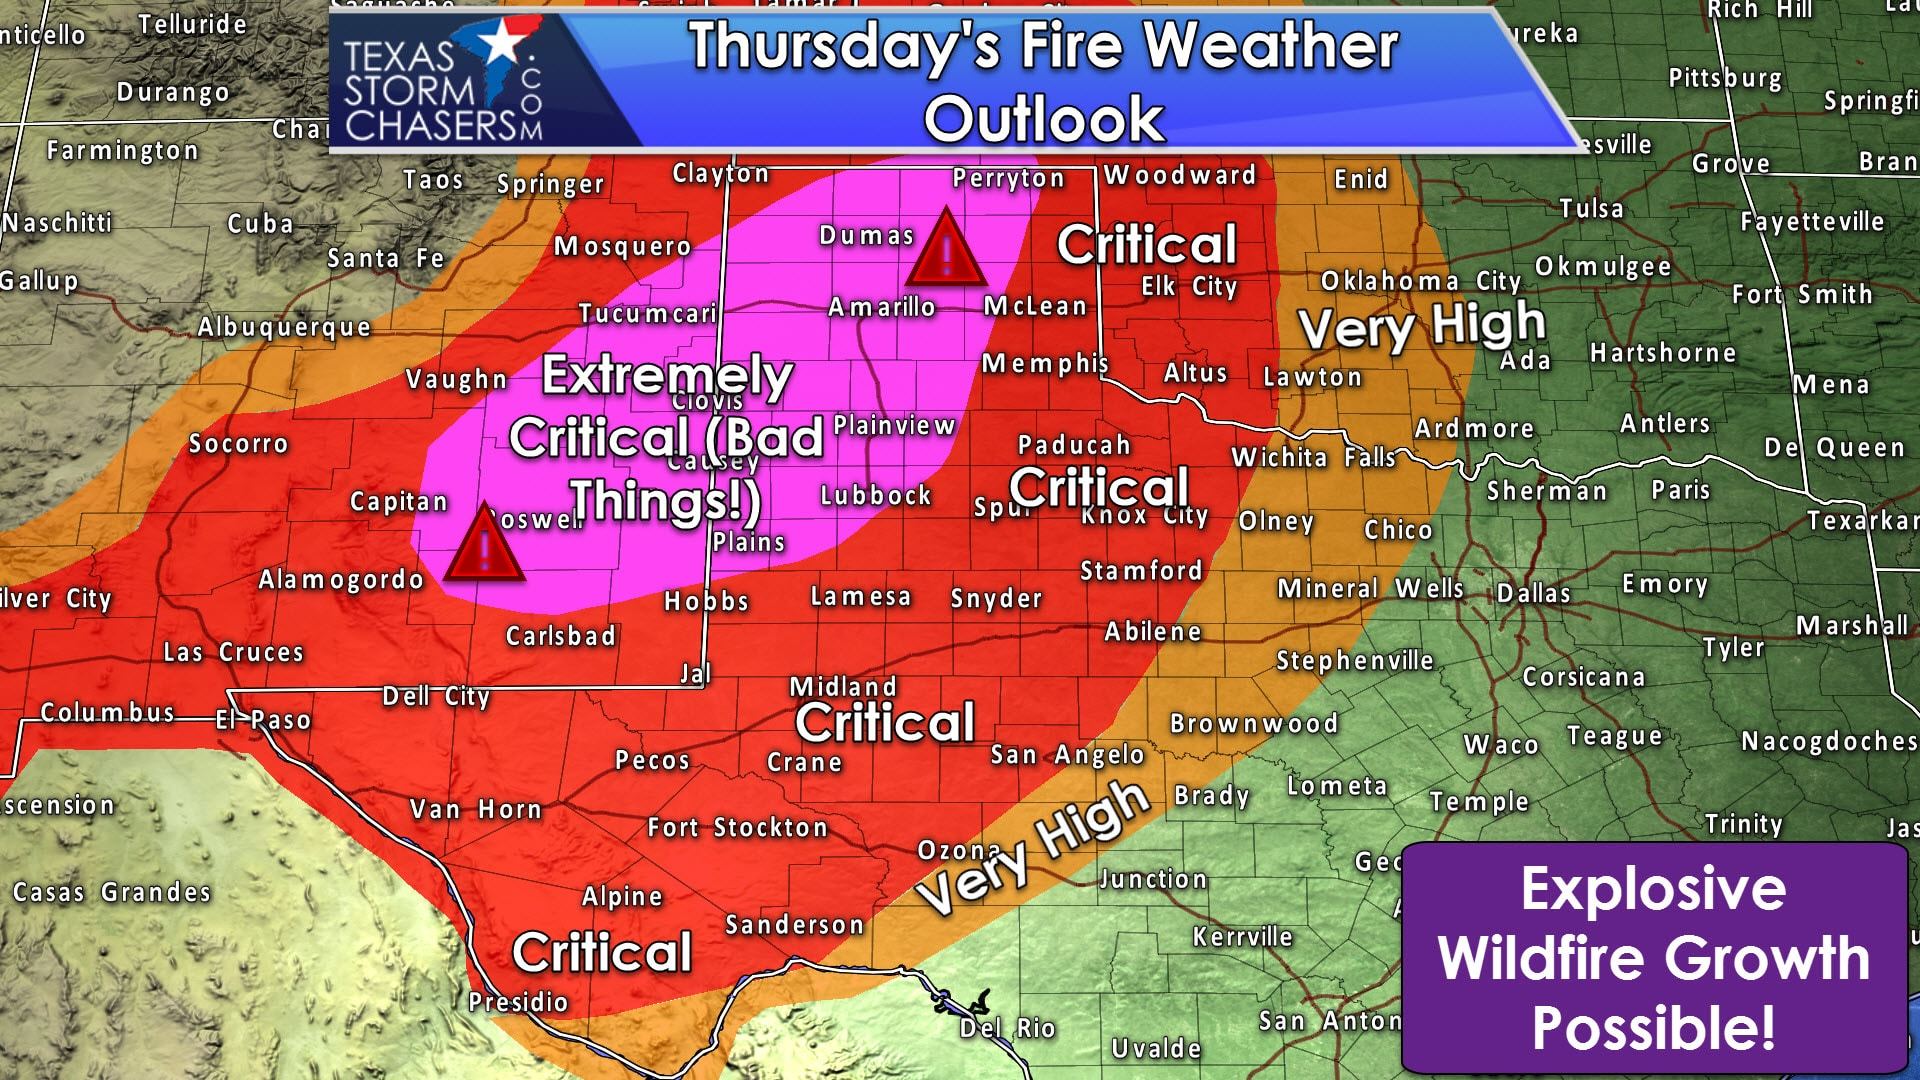 Major Wildfire Threat in Western Texas Tomorrow + 100°F in South Texas?